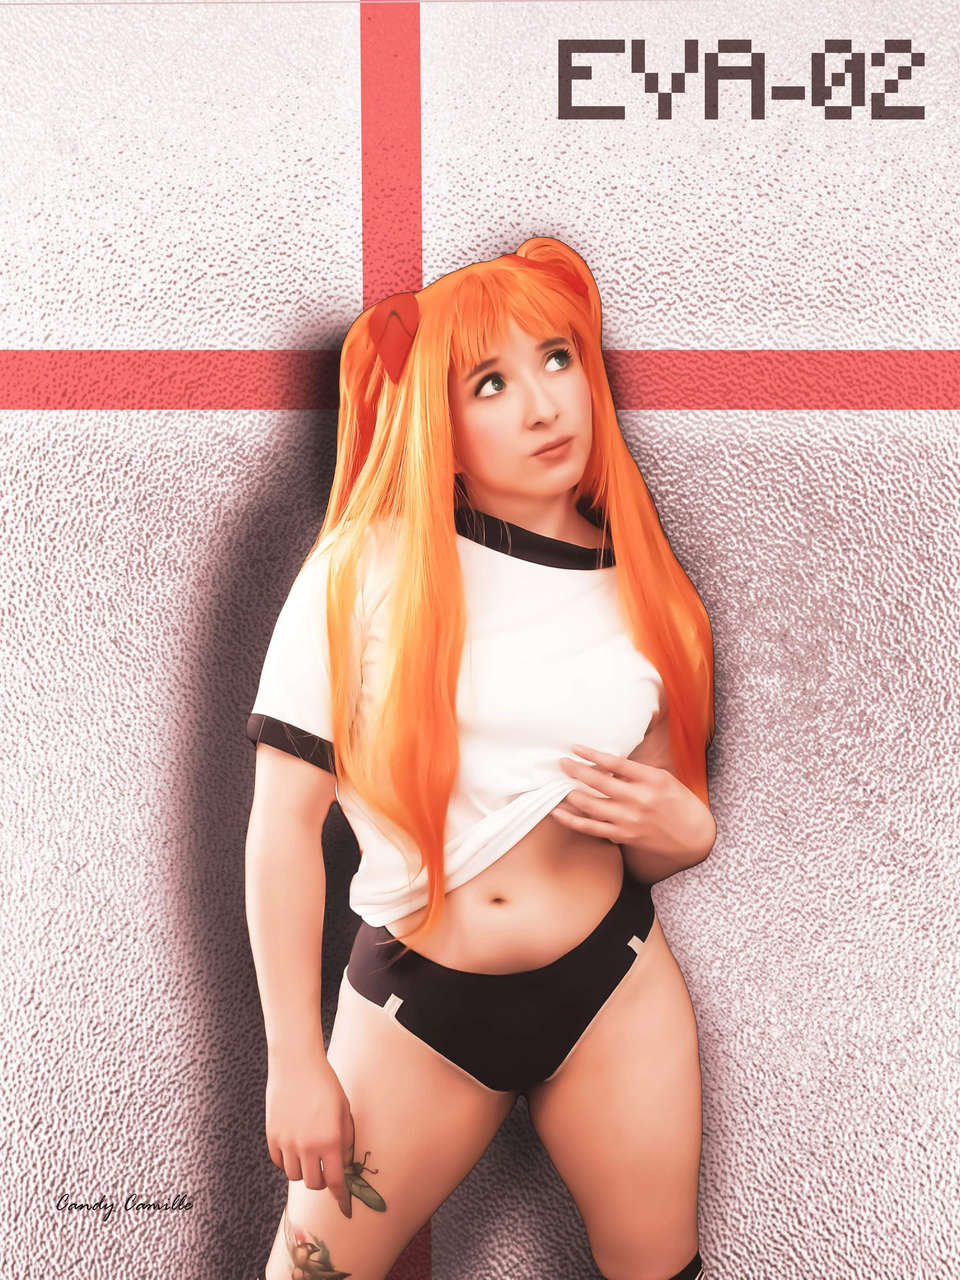 Asuka Of Evangelion By Candy Camill